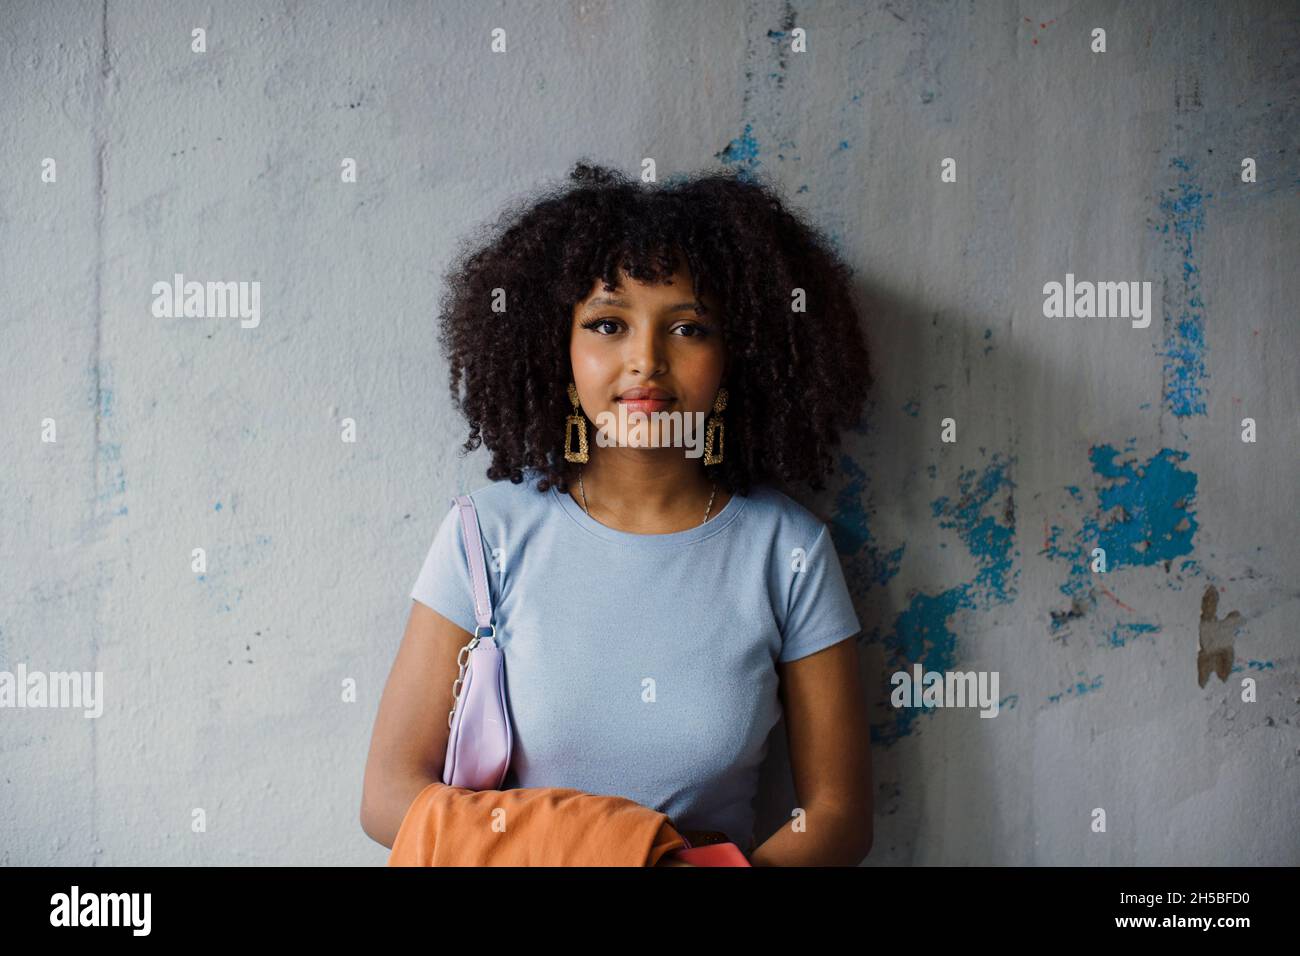 Portrait of teenage girl against wall Stock Photo